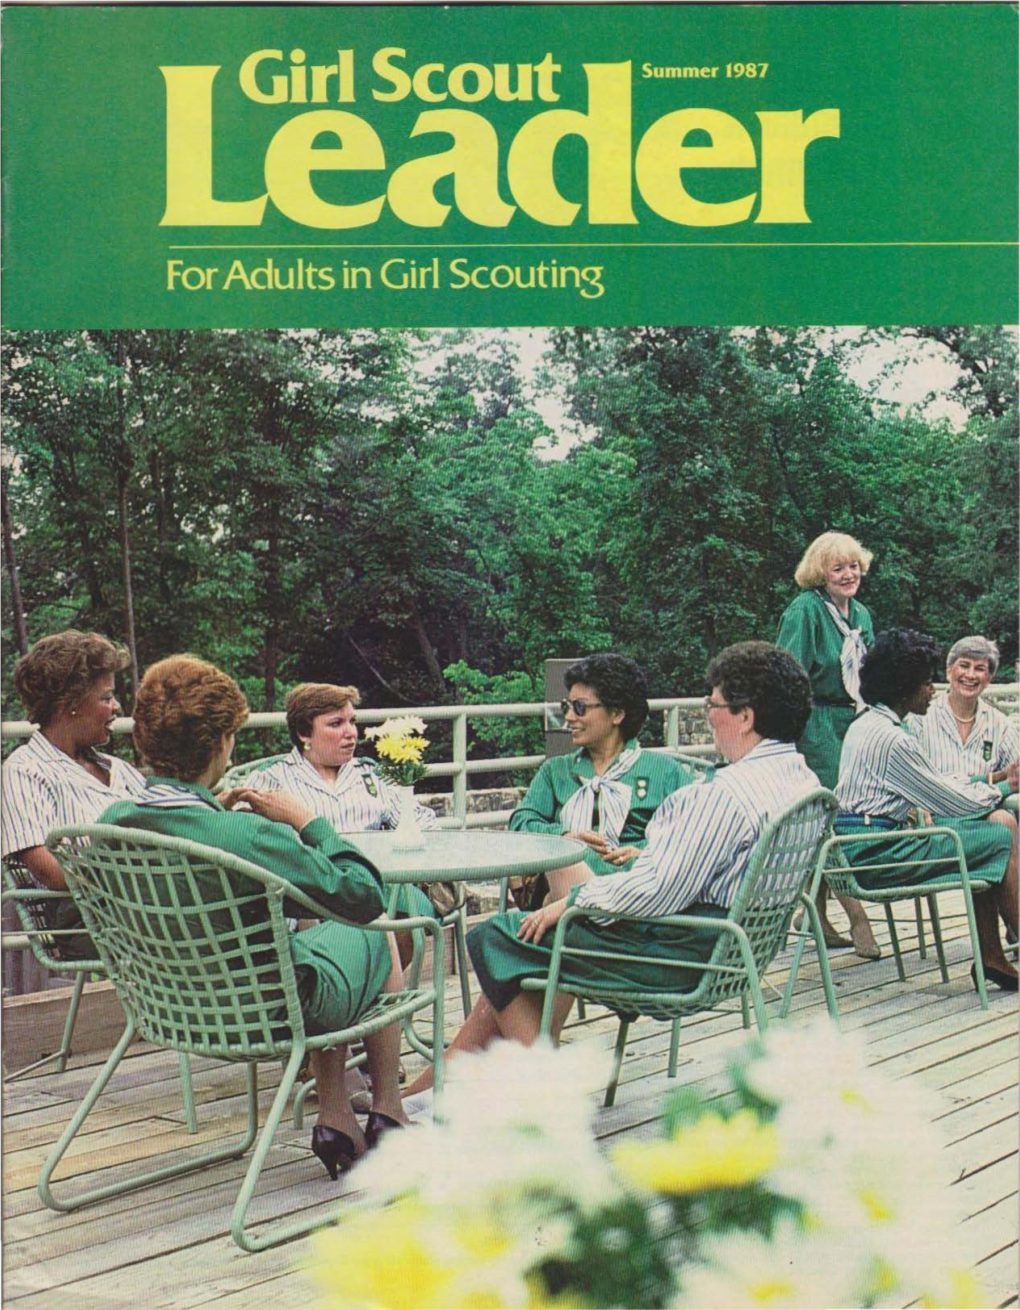 Girl Scout Leader Magazine